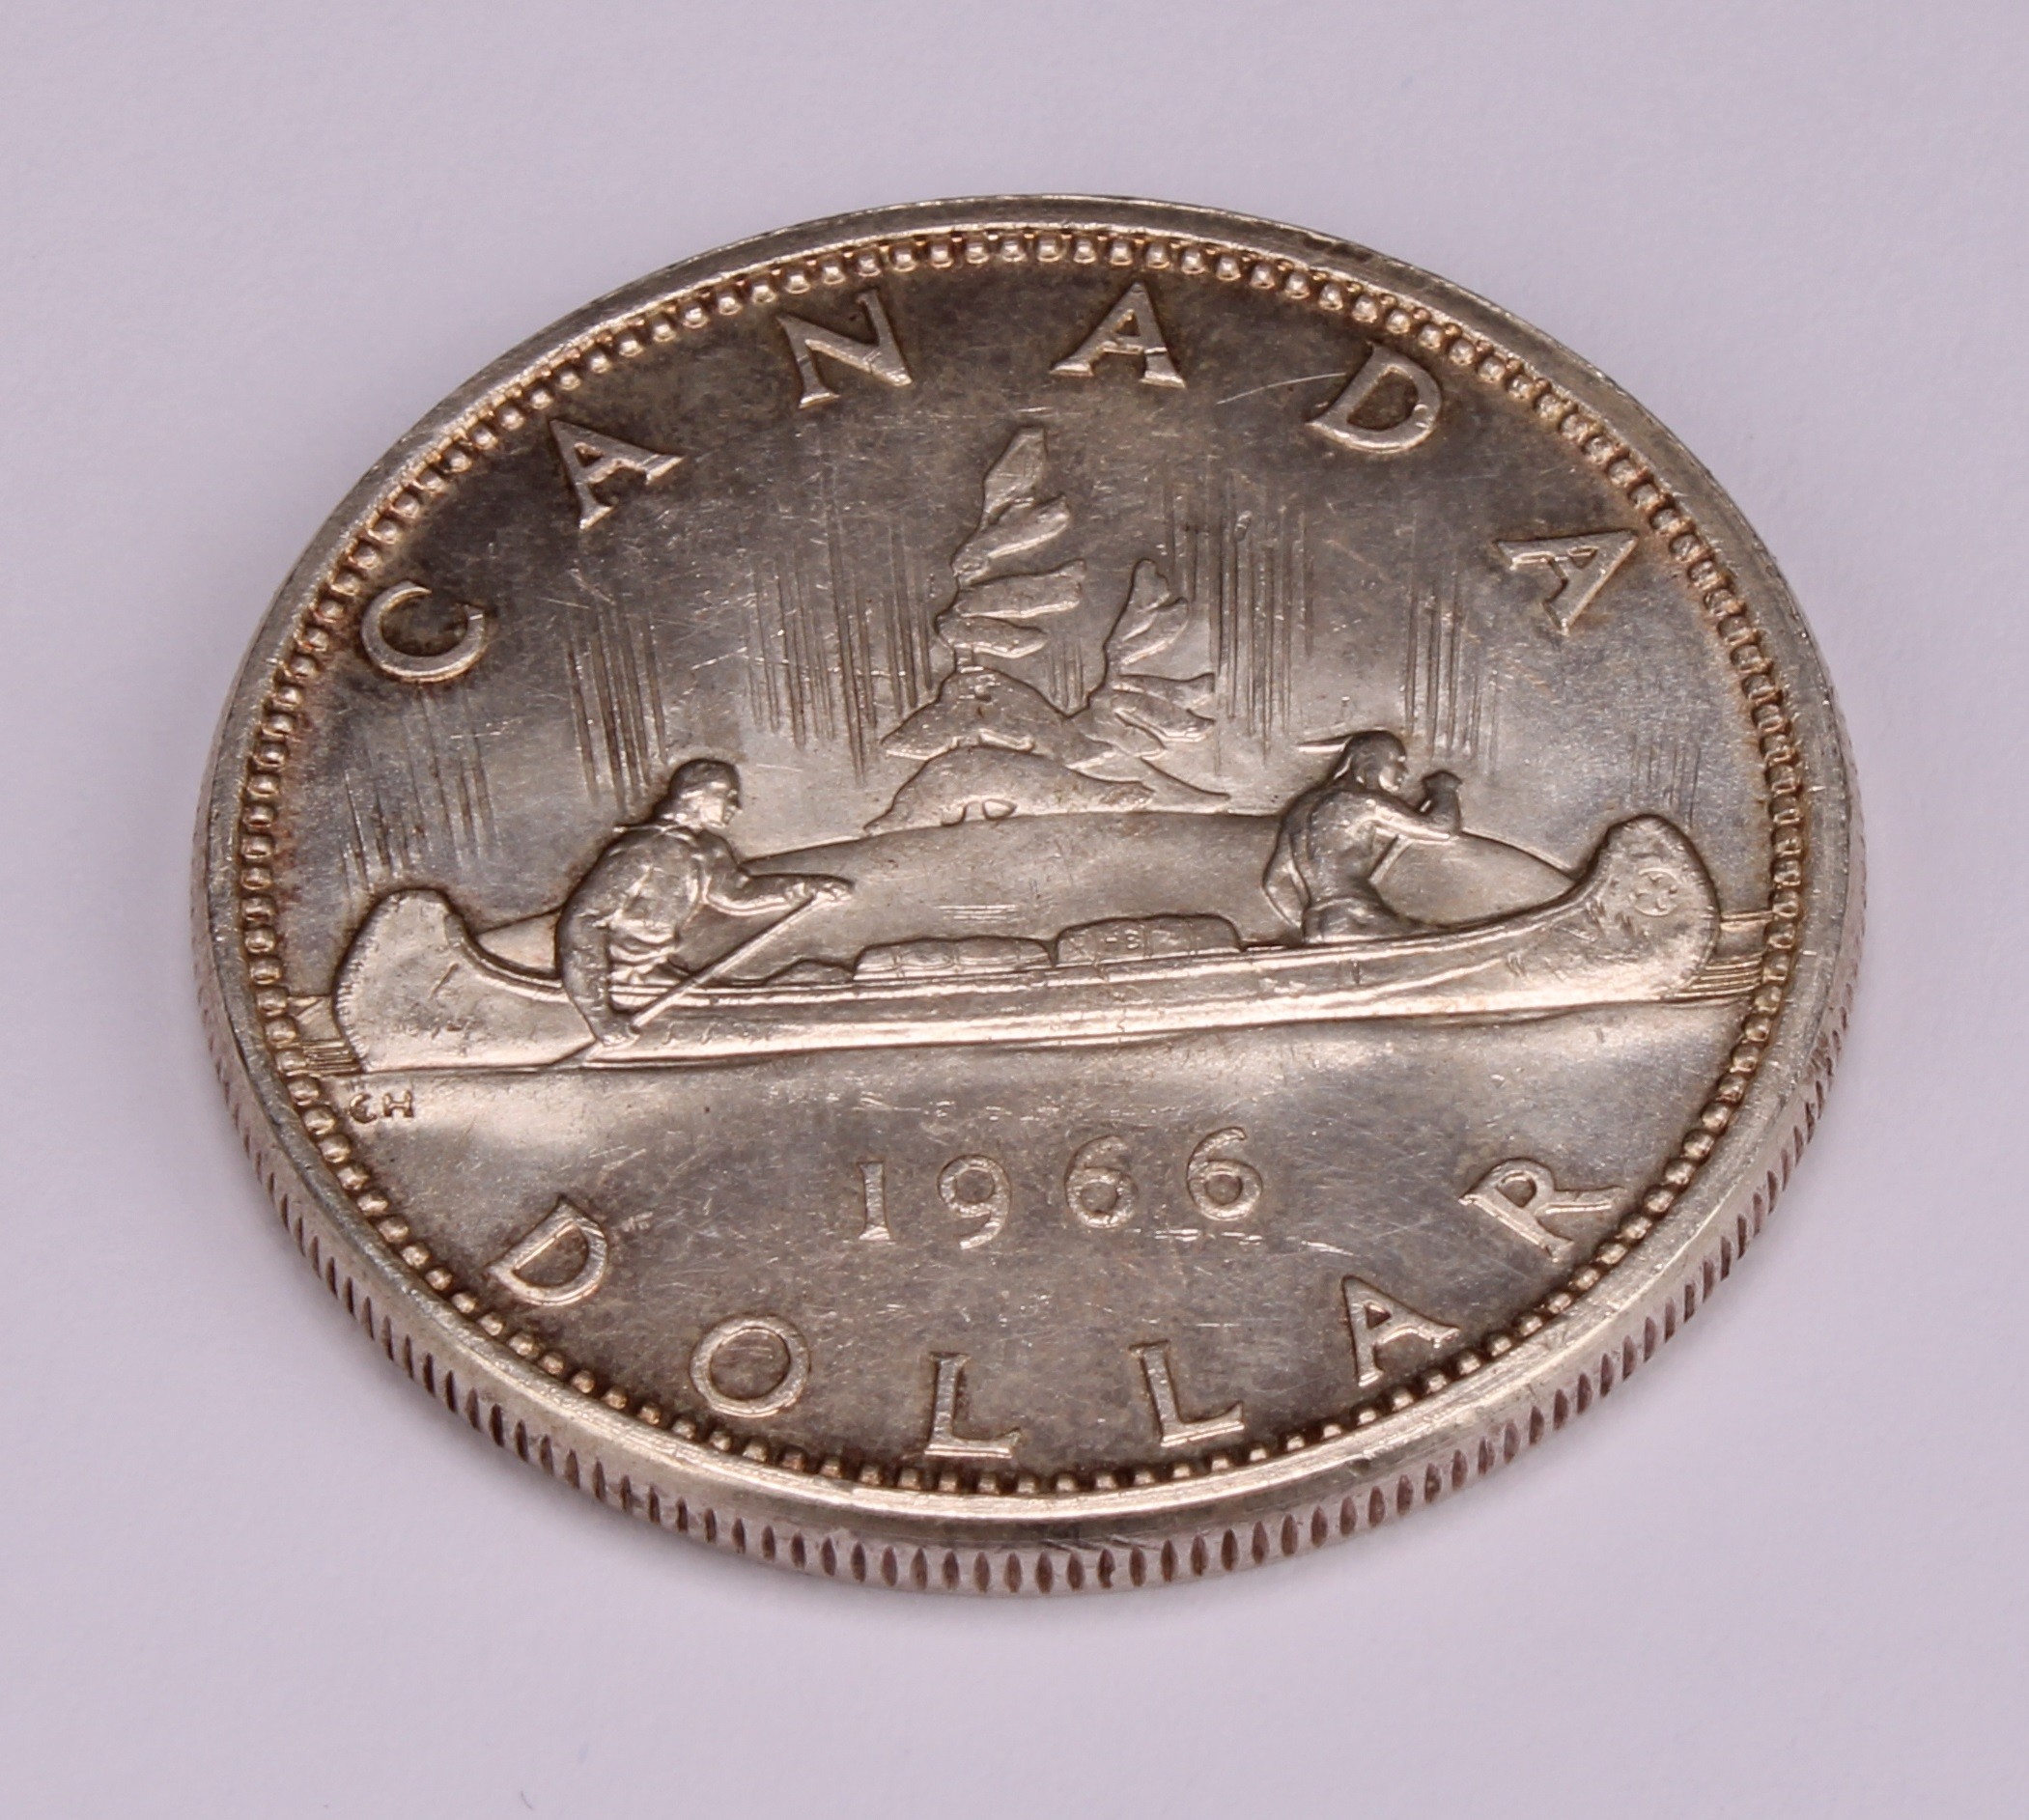 Coins - an Elizabeth II silver Canadian dollar, small beads, 1966 - Image 2 of 3